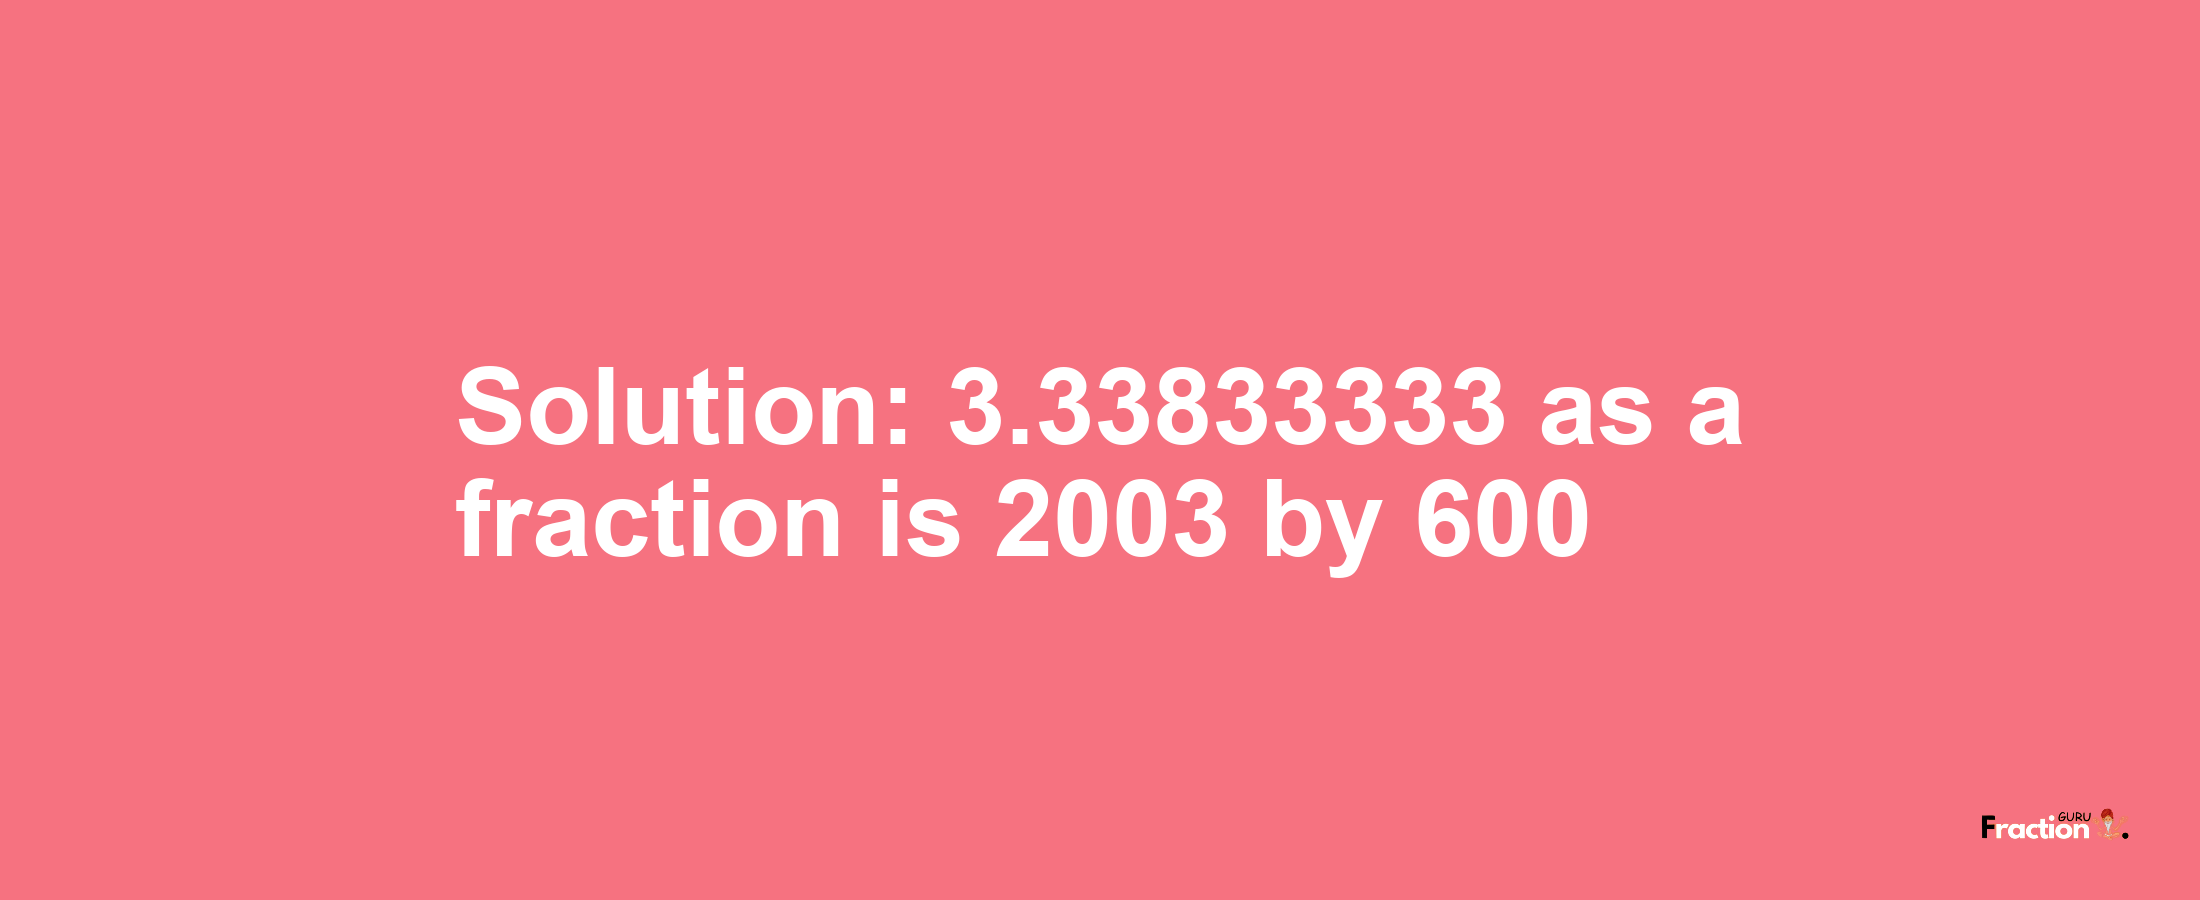 Solution:3.33833333 as a fraction is 2003/600